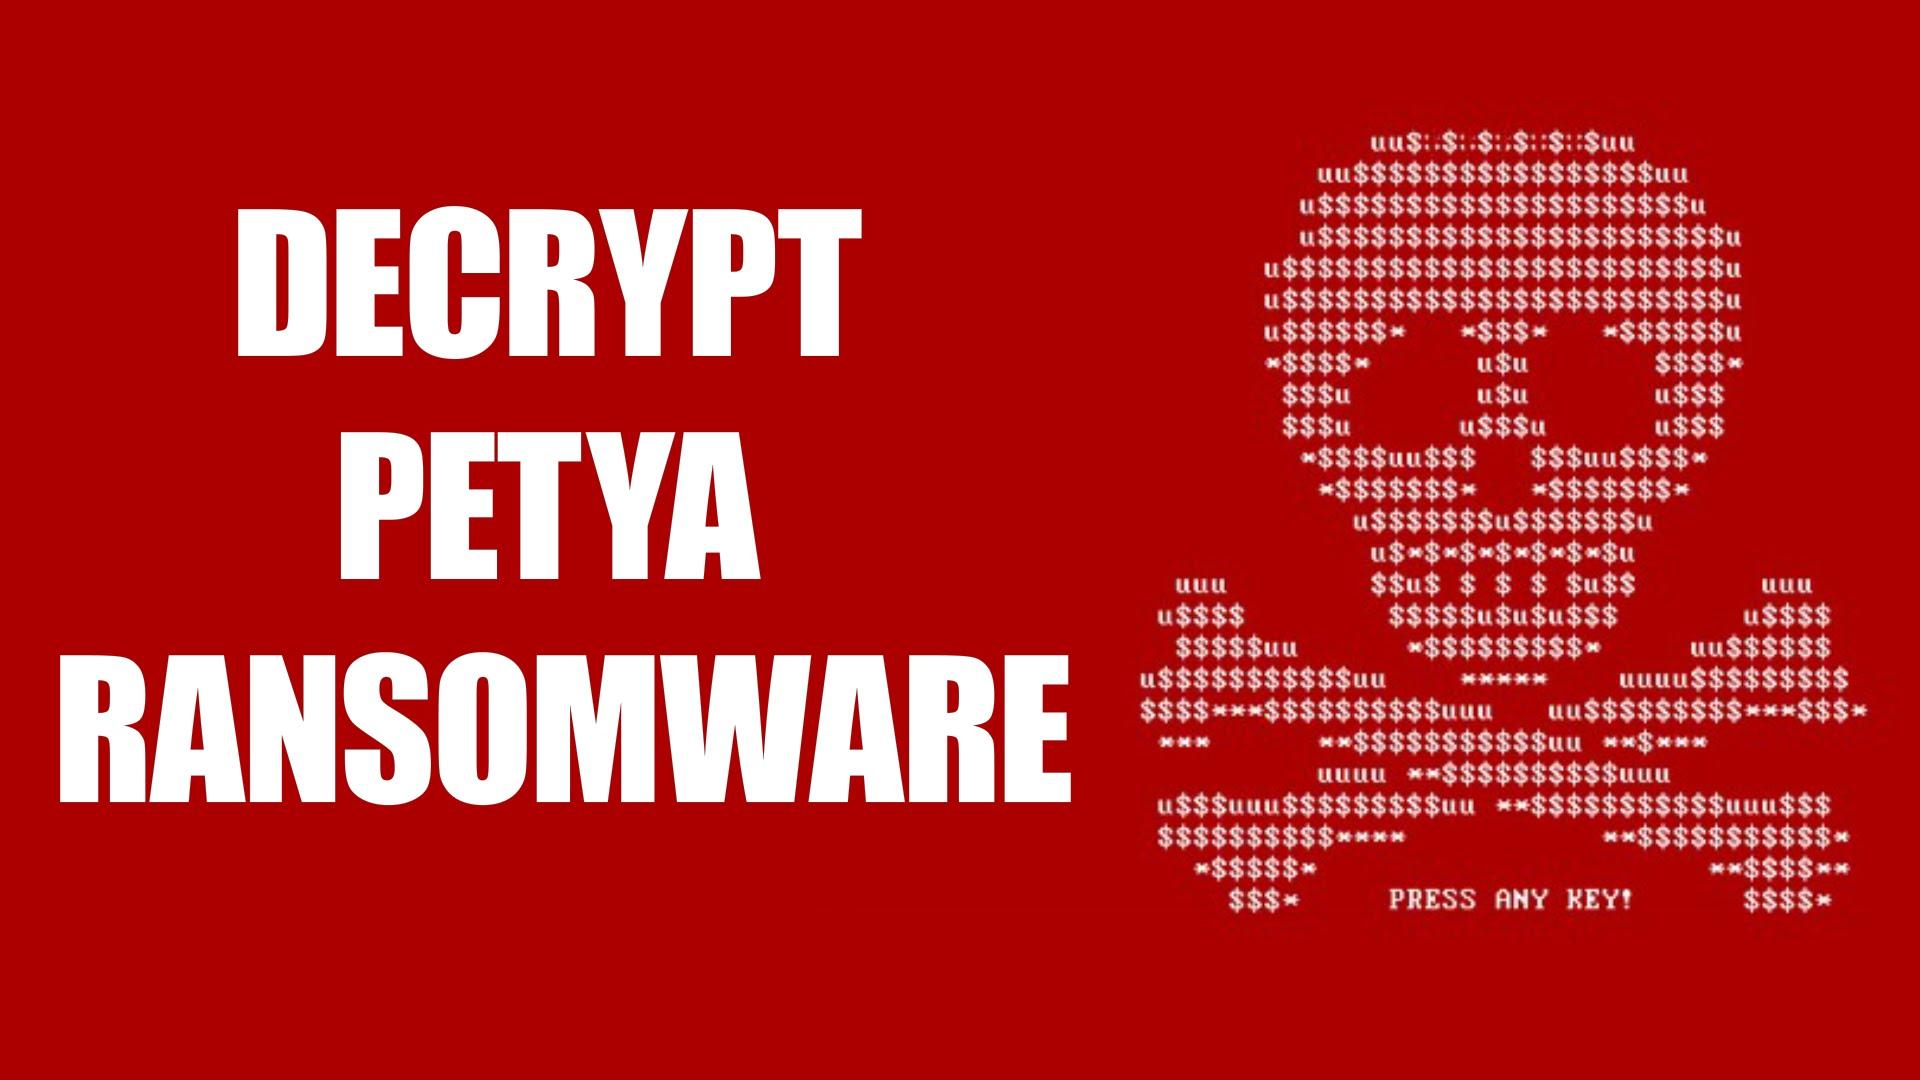 A red computer screen with skull & crossbones symbol and words Decrypt Petya Software